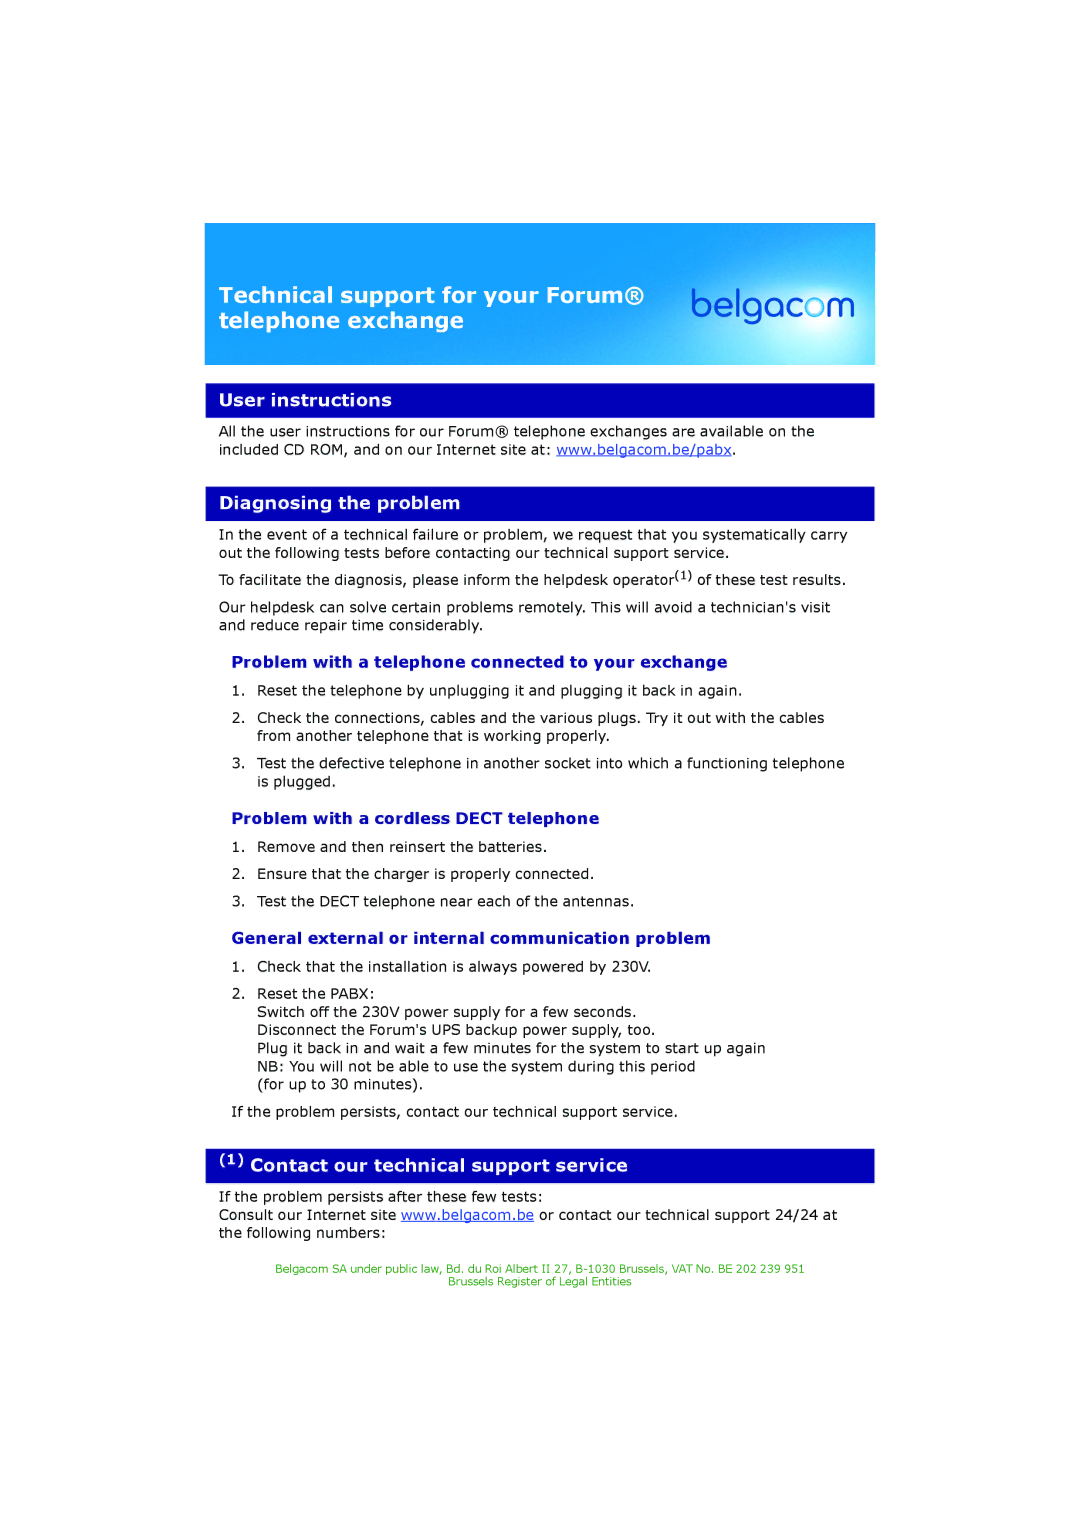 Belgacom 500 manual Technical support for your Forum telephone exchange 